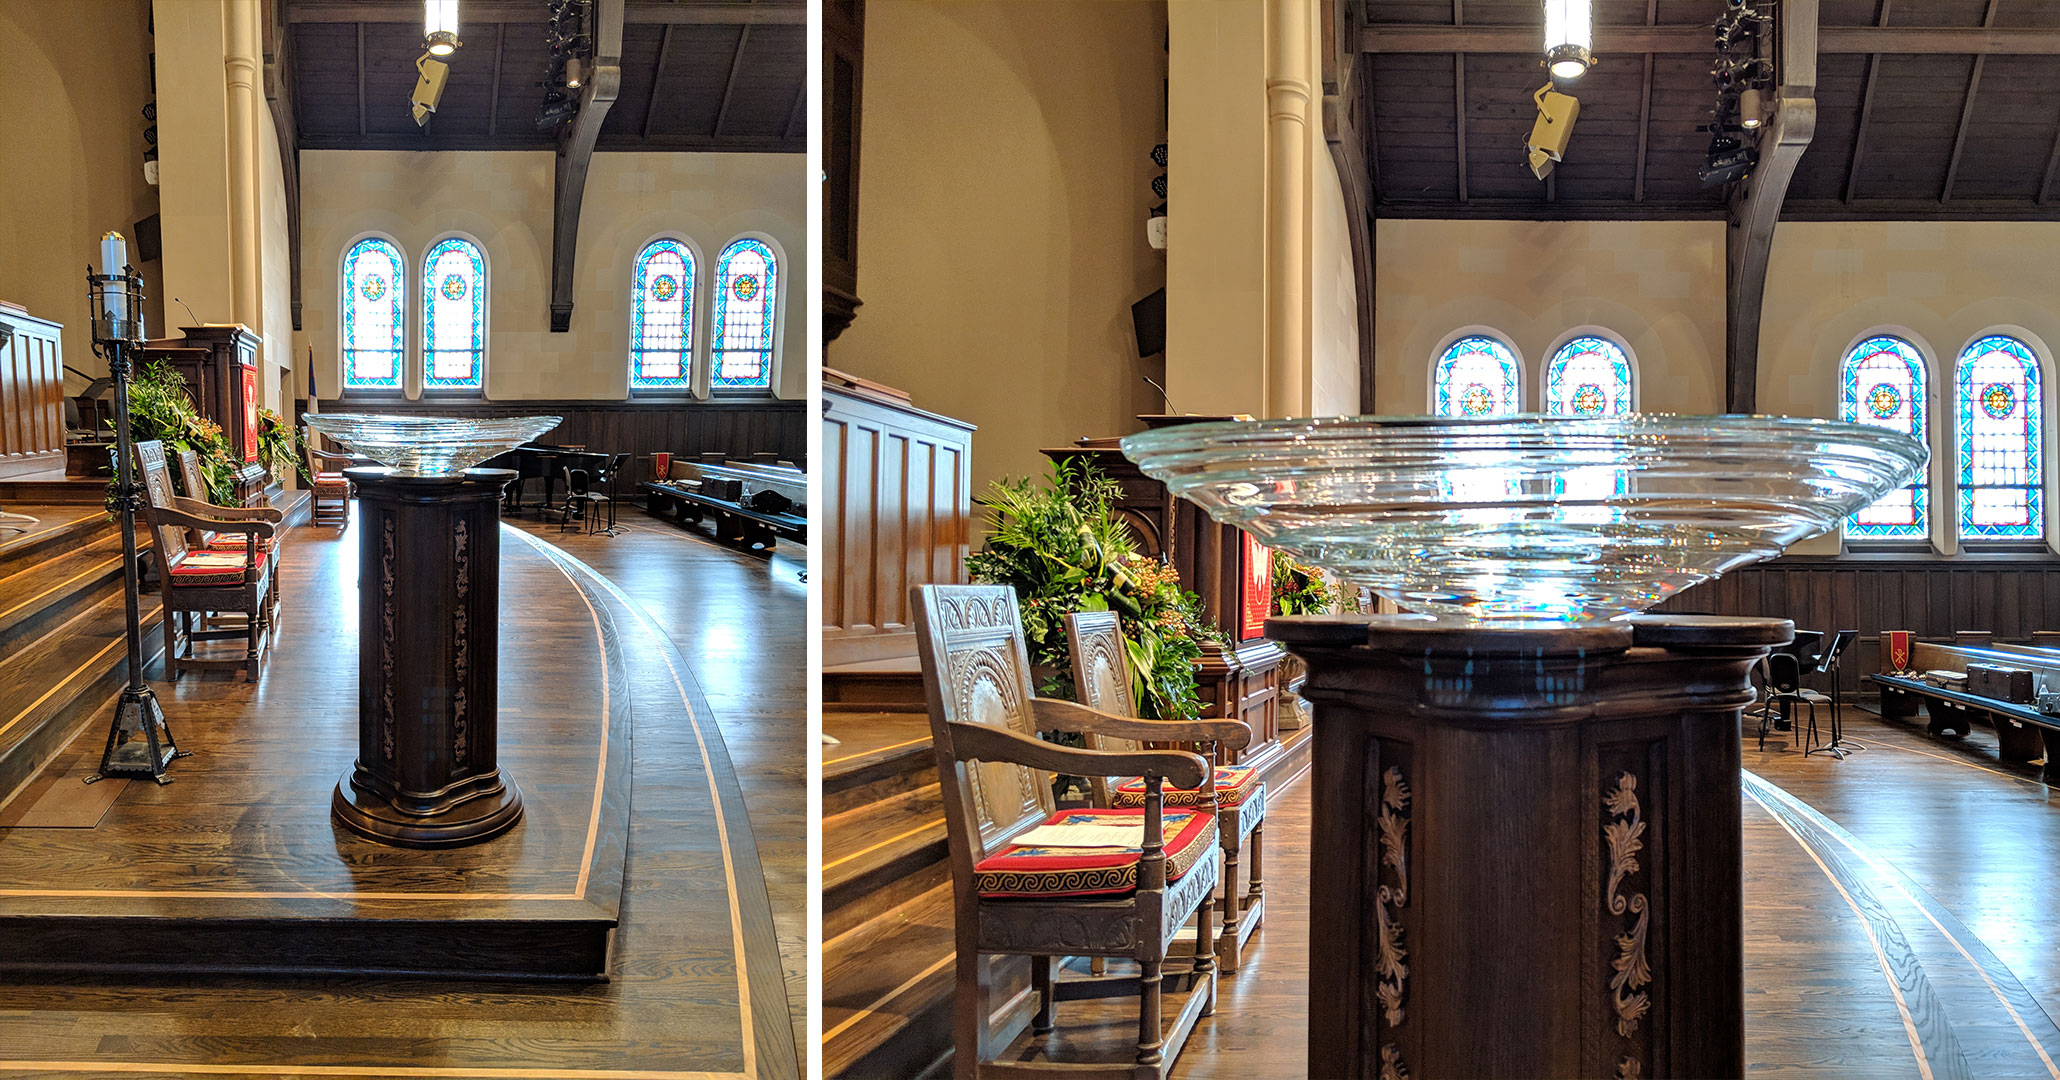 Historic Preservationists and Interior Designers at Boudreaux worked with First Presbyterian Church in Spartanburg, SC to design the baptismal font.